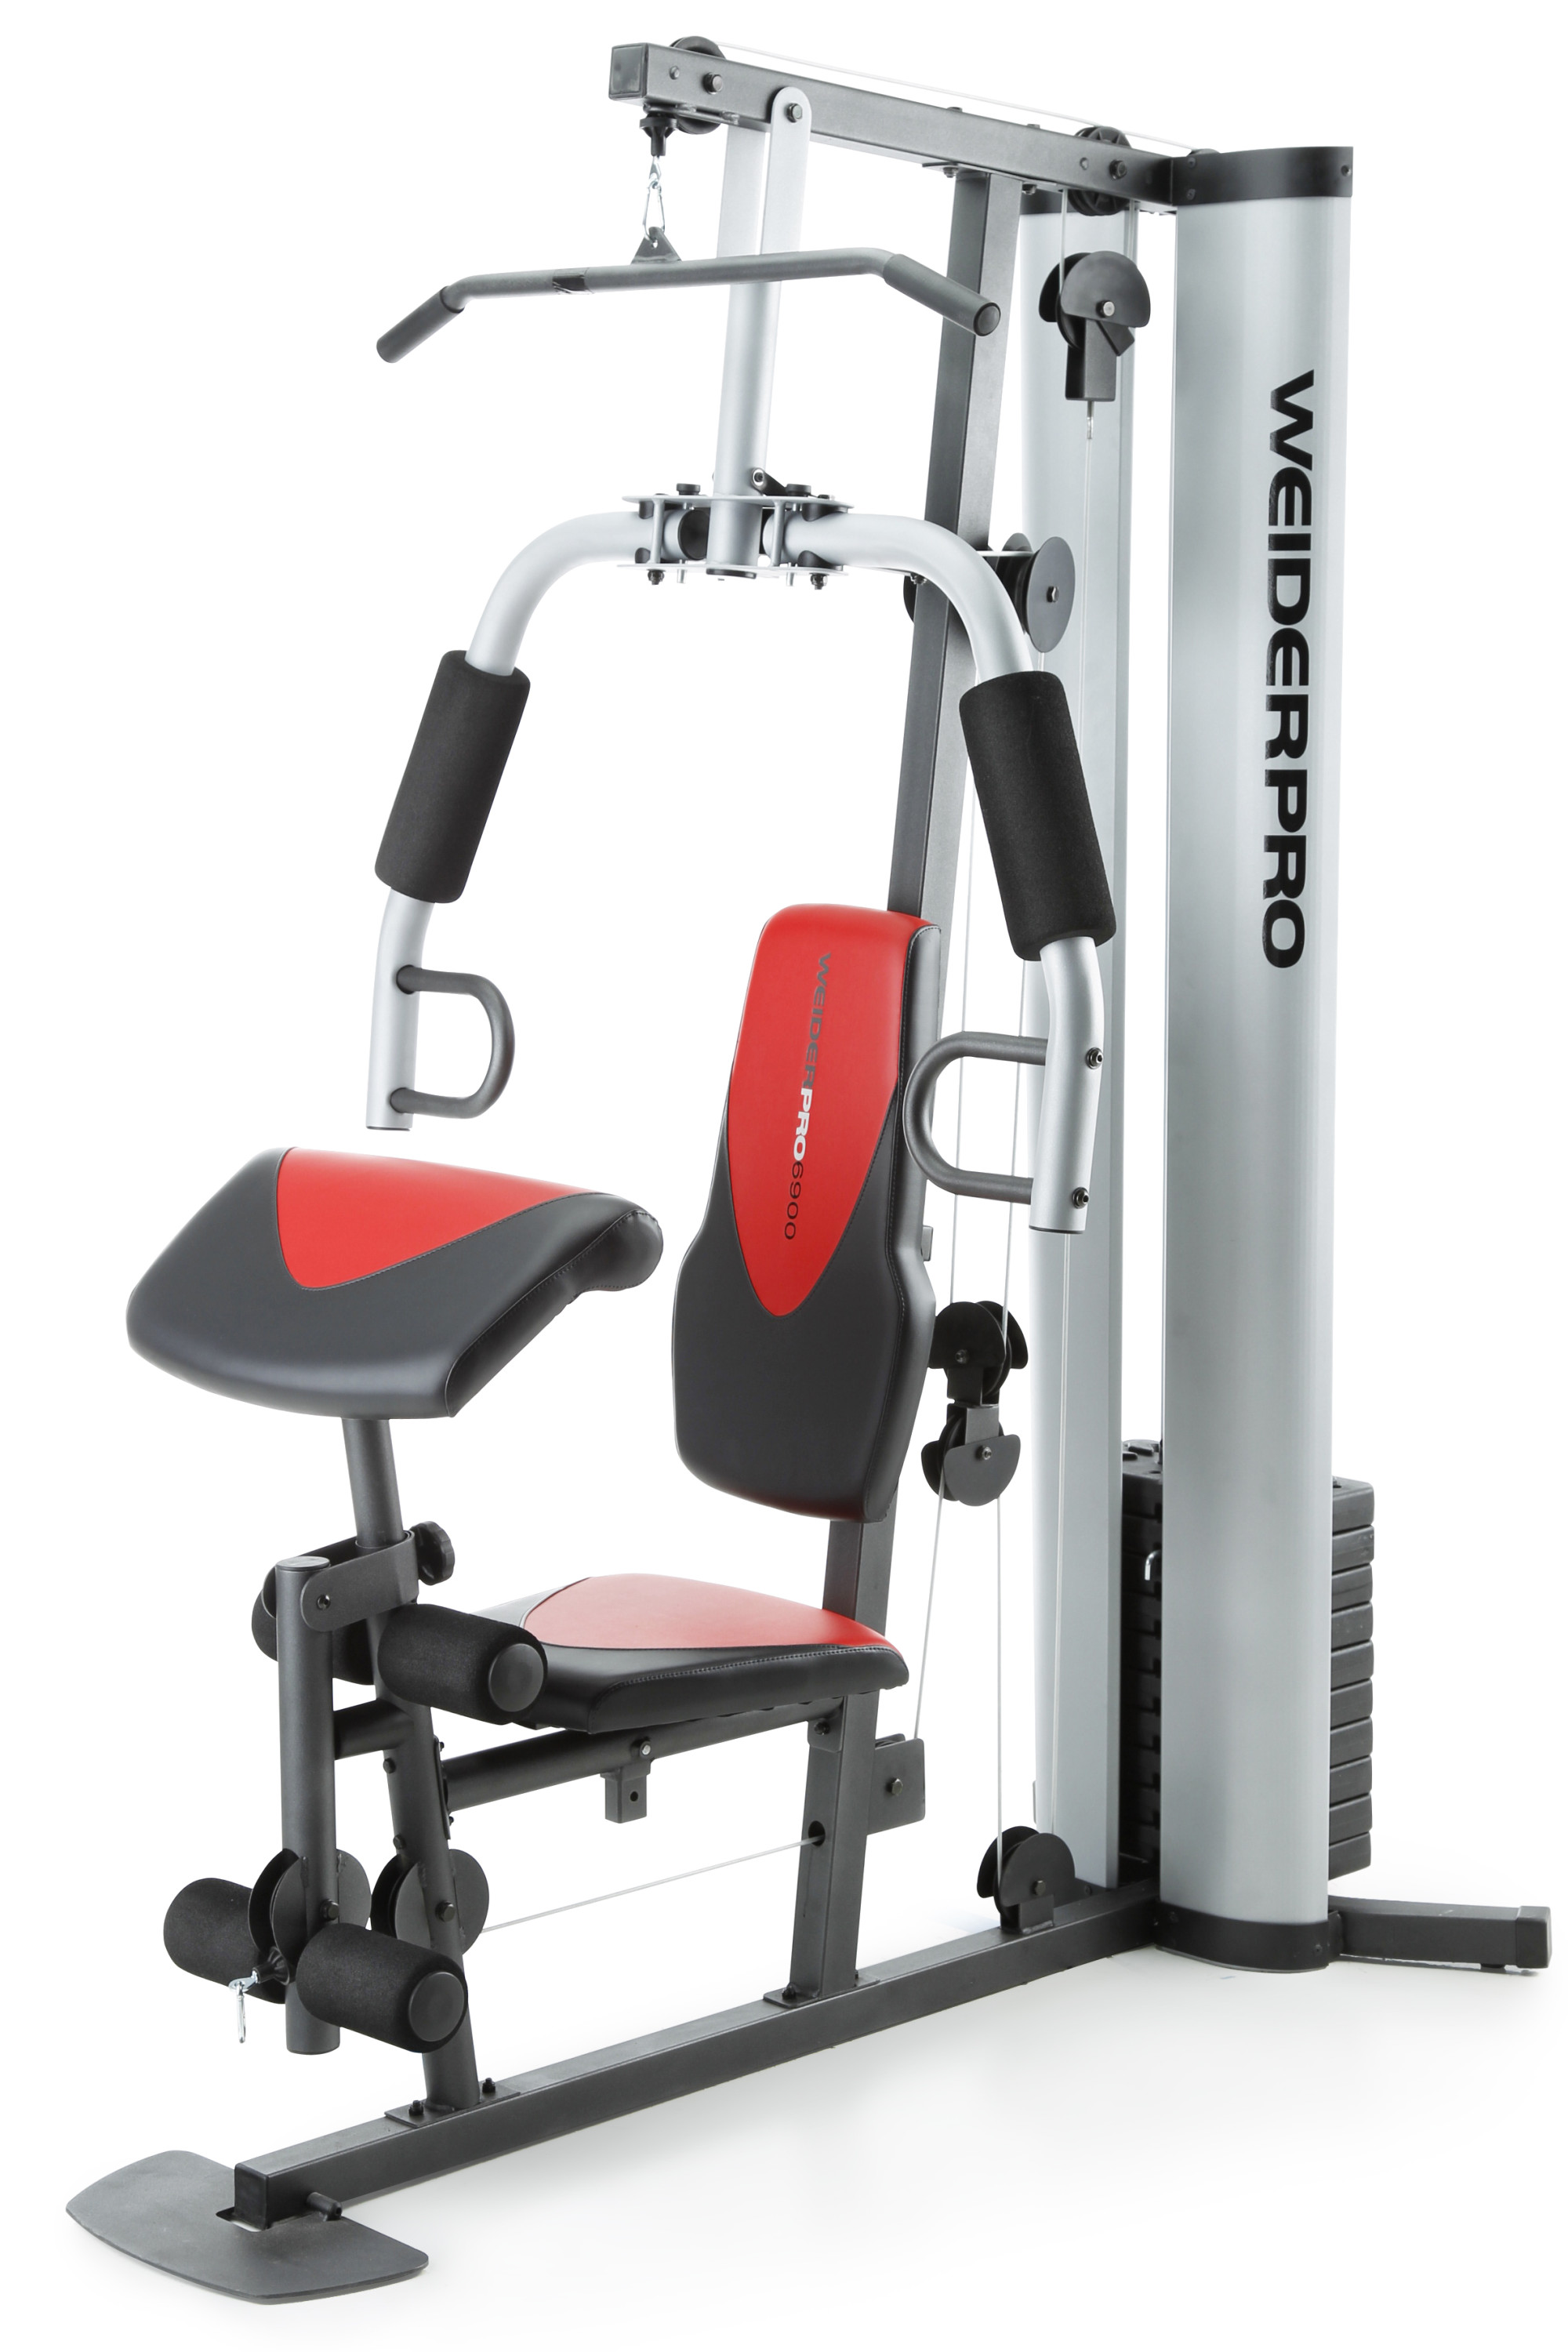 Weider Pro 6900 Home Gym System with 125 Lb. Weight Stack - image 1 of 39